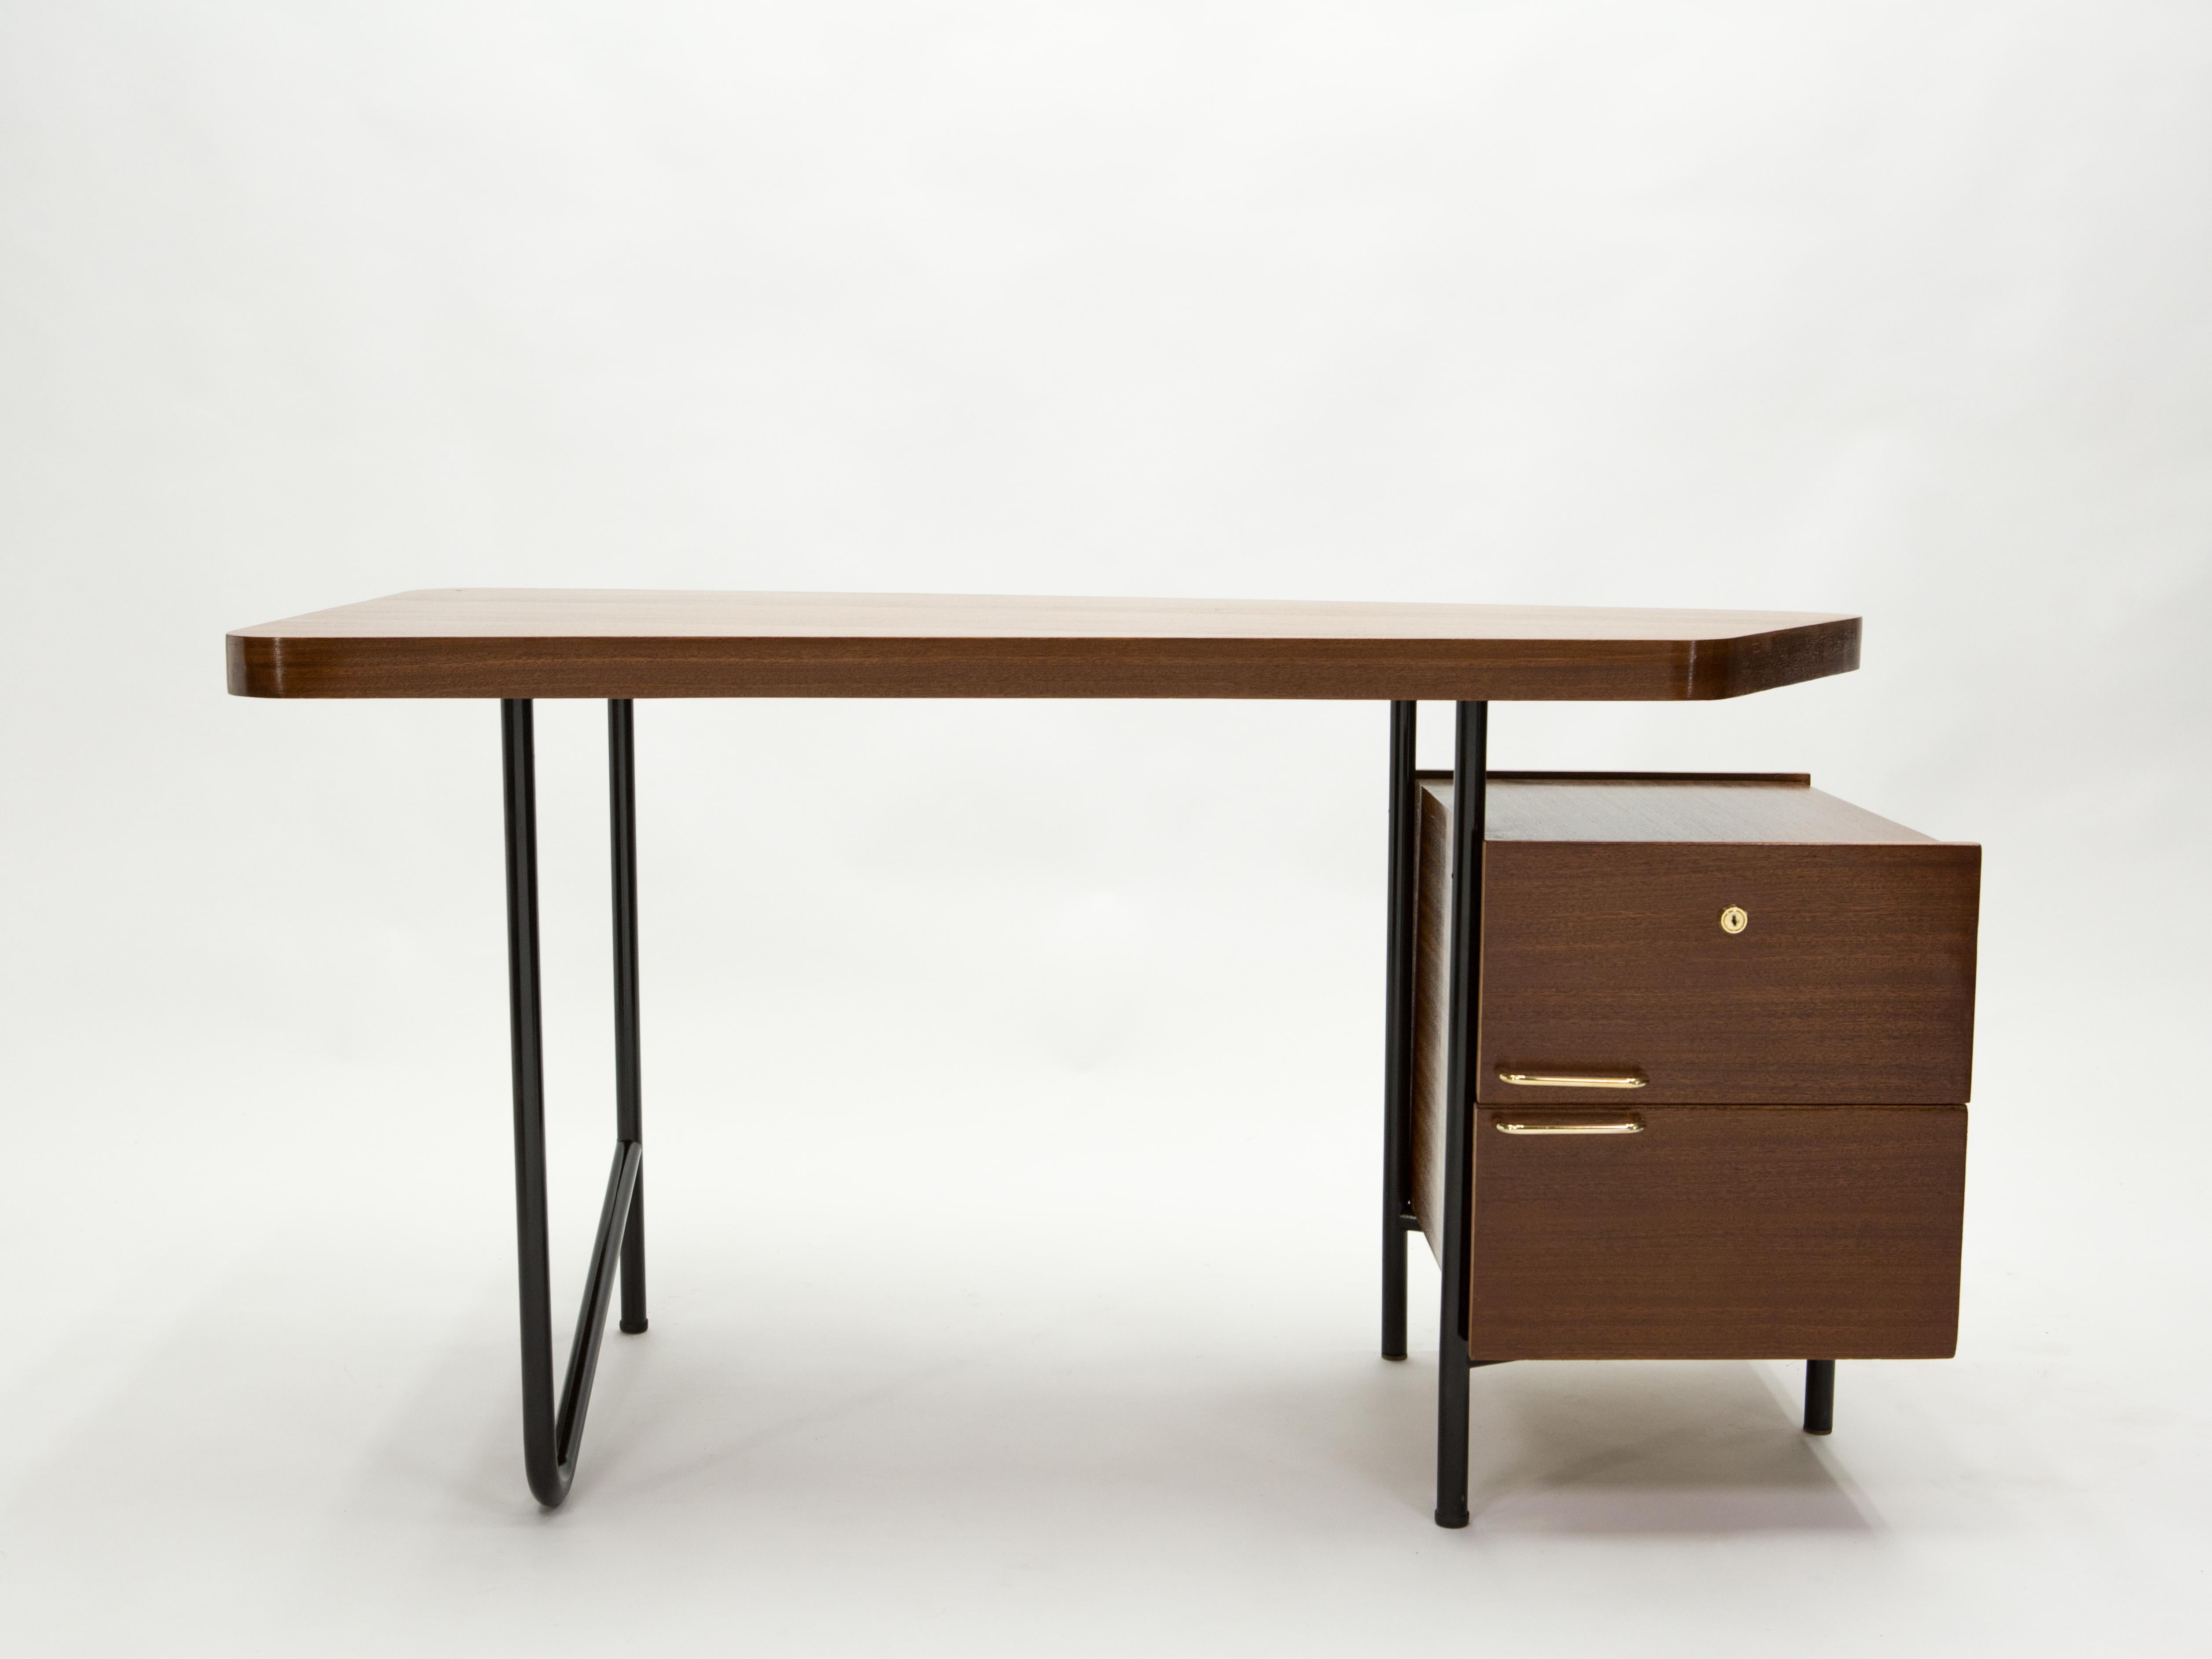 This rare and beautiful French modernist desk was made by Georges Frydman for EFA editor in the late 1950s. It features a fully mahogany veneer on the asymmetrical top and two drawers with brass handles and lock, with black painted tubular metal